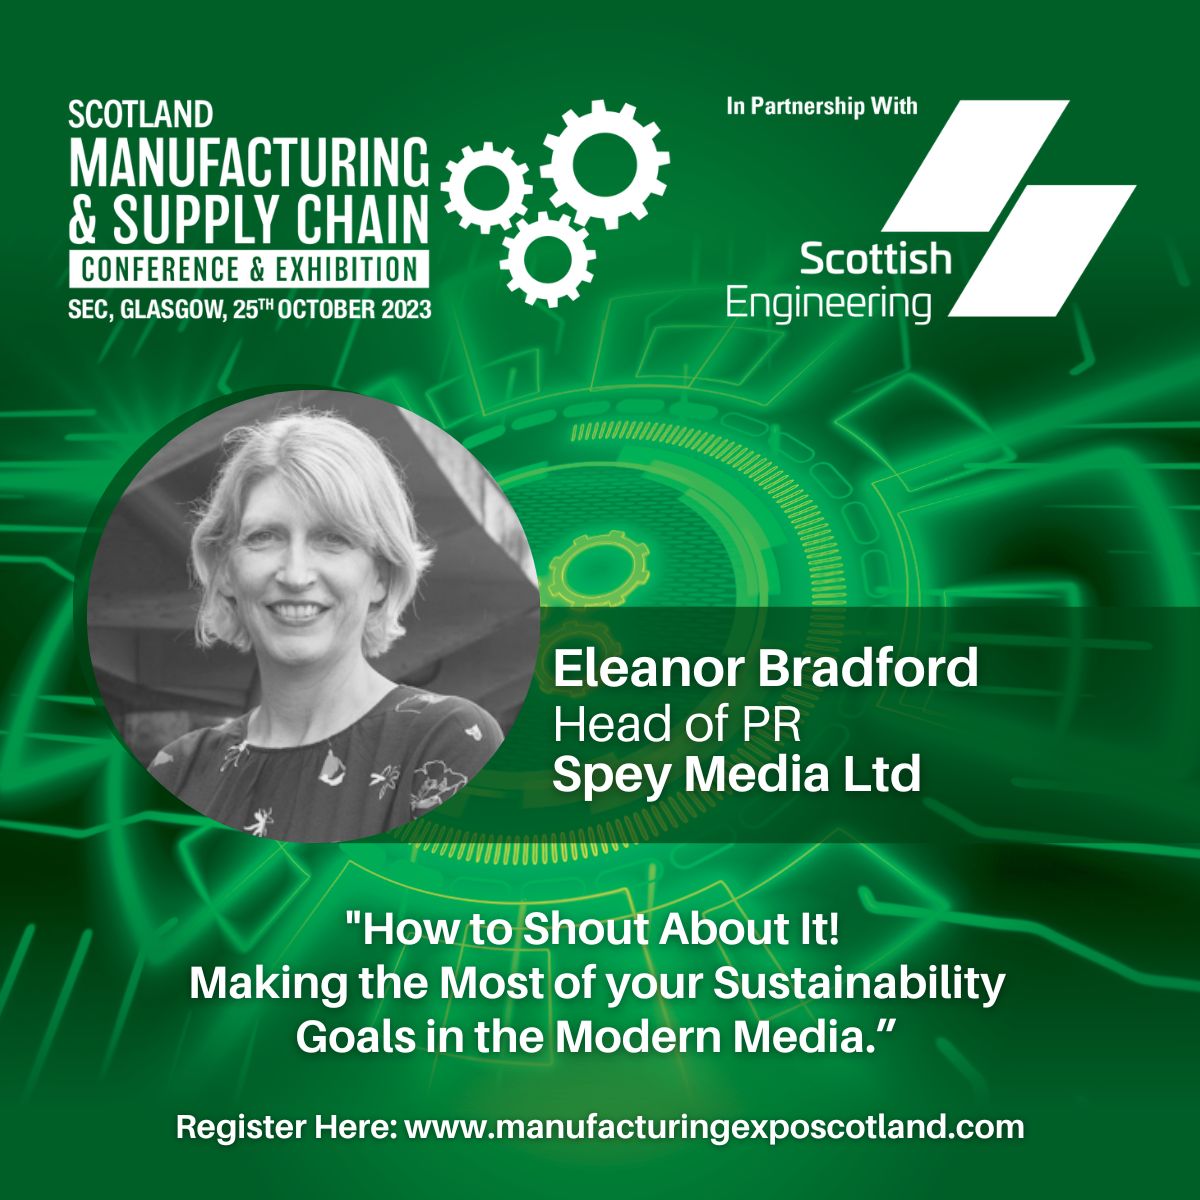 We are thrilled to announce that Eleanor Bradford of @WeAreSpey will be speaking at the Scotland Manufacturing & Supply Chain Conference & Exhibition on October 25th, 2023, at SEC, Glasgow!

Register now 🎟️ : manufacturingexposcotland.com/register/ 

 #ManufacturingExpoSCO